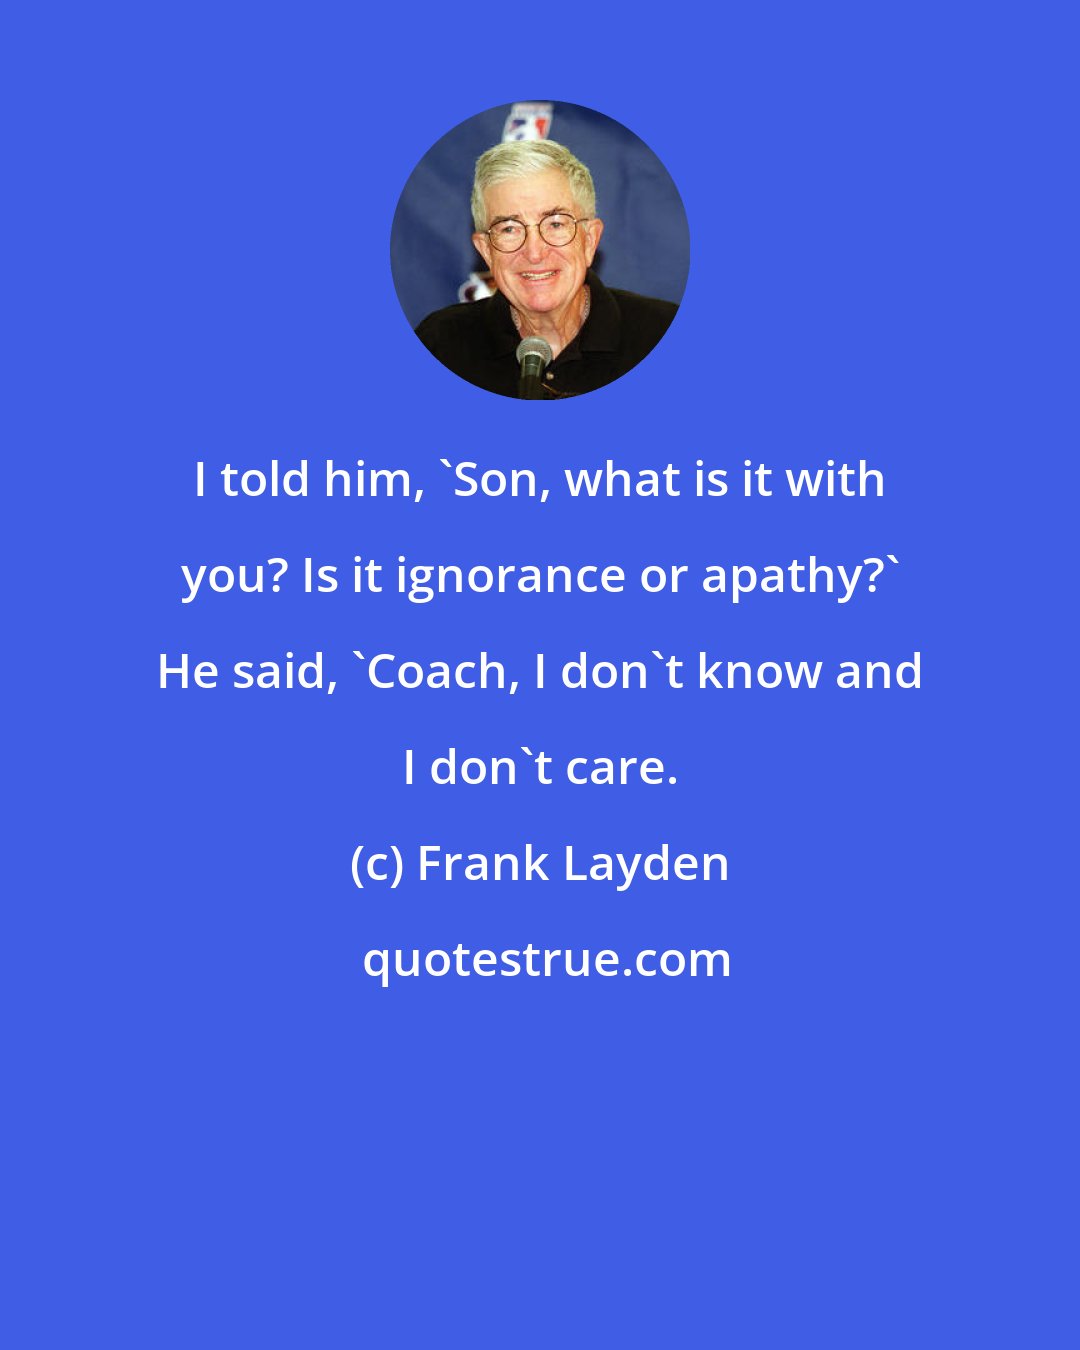 Frank Layden: I told him, 'Son, what is it with you? Is it ignorance or apathy?' He said, 'Coach, I don't know and I don't care.